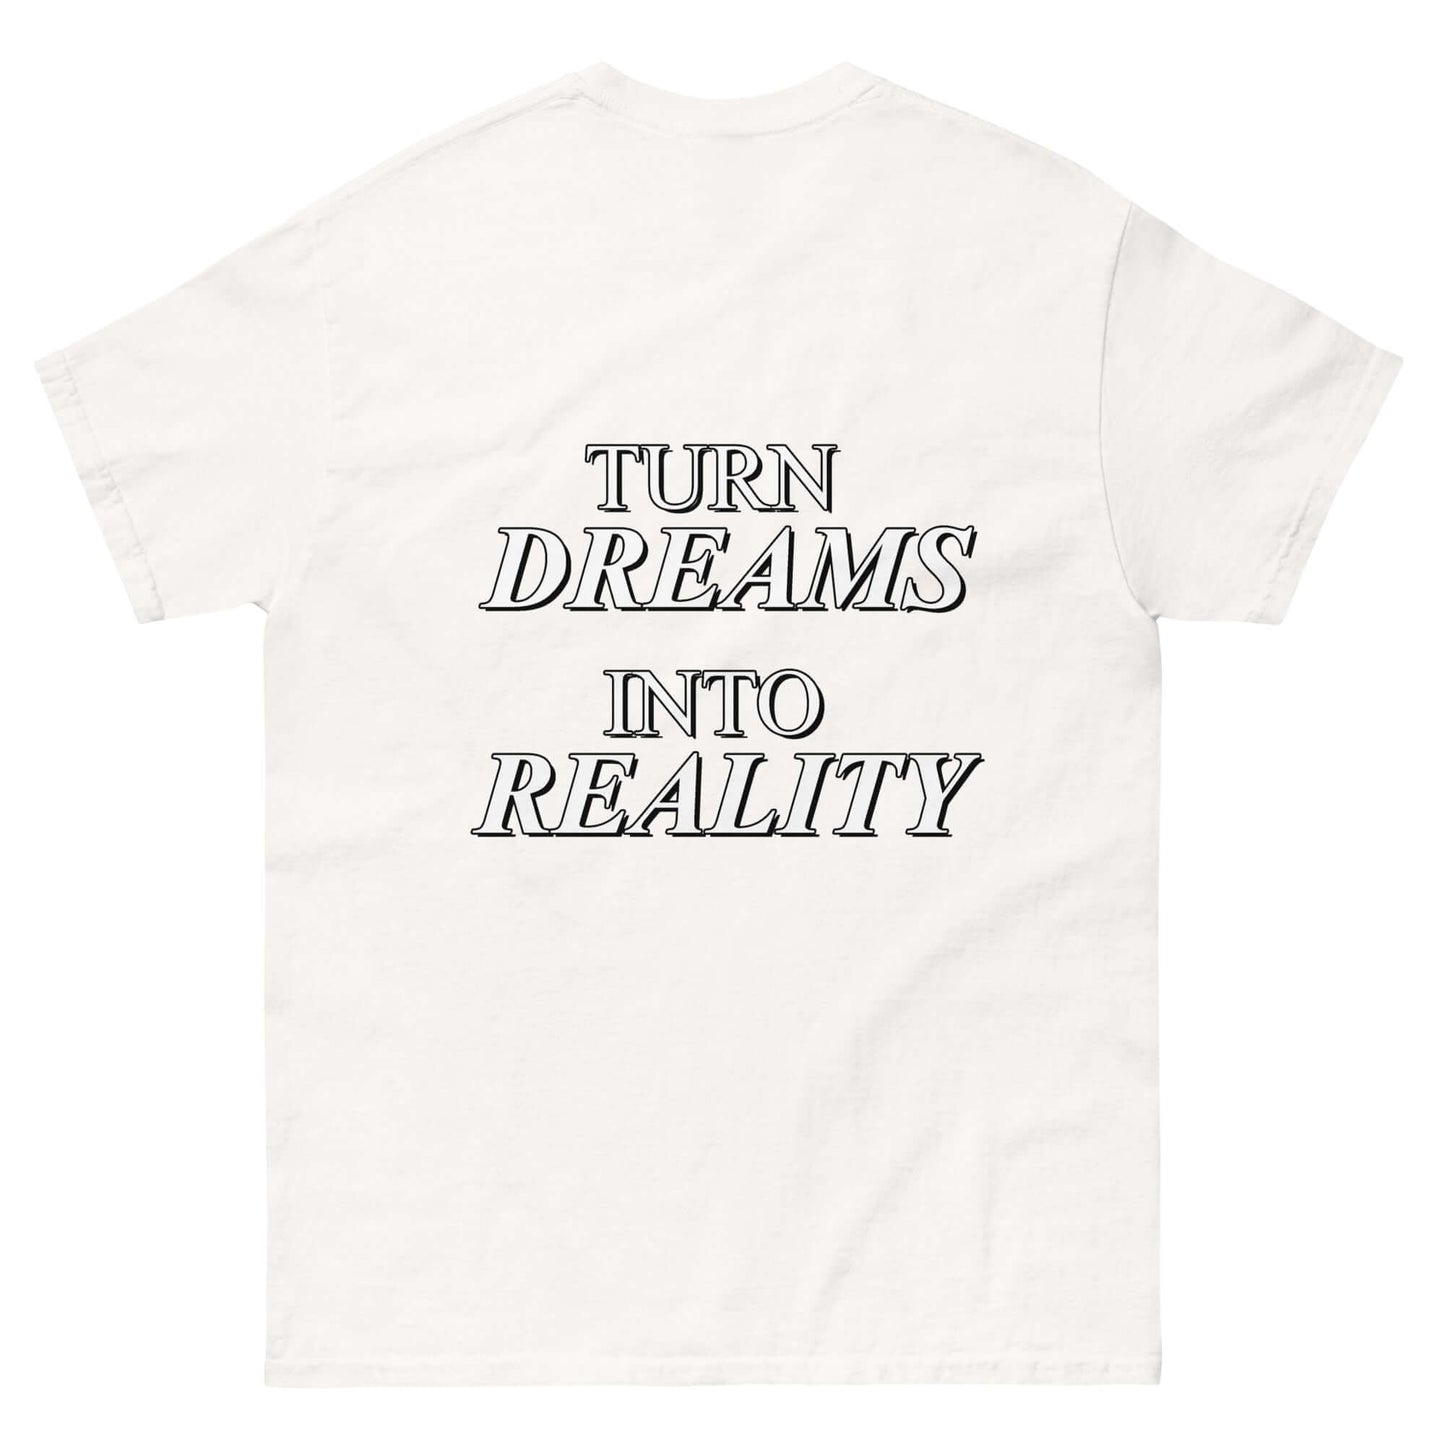 "Dreams into reality" - Classic T-Shirt